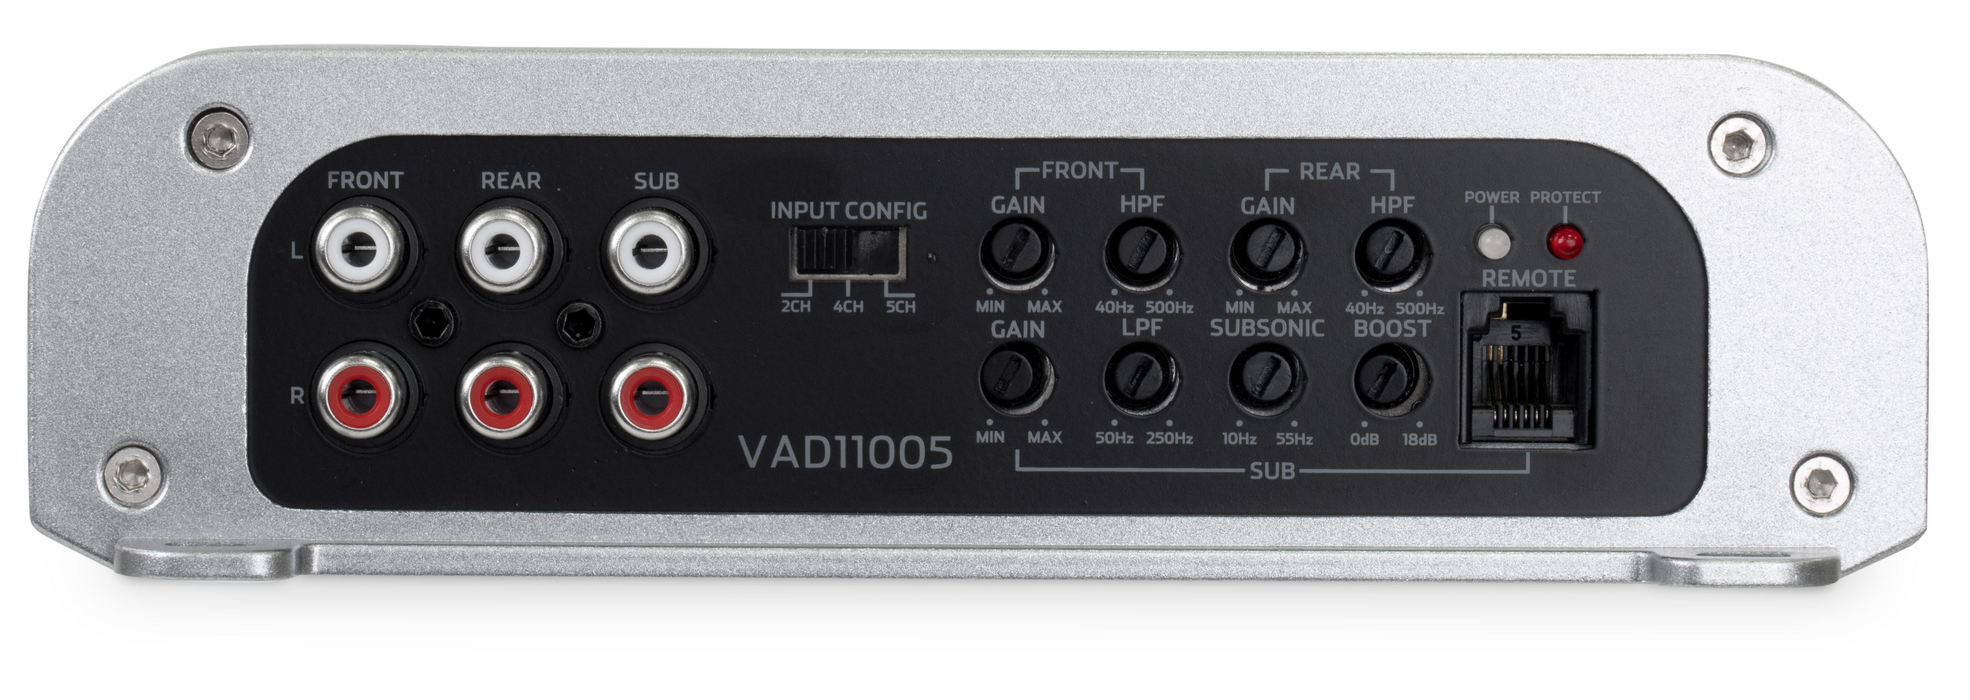 VAD11005 1100W RMS V-Series Full-Range Class-D 5-Channel Amplifier (Marine Certified)